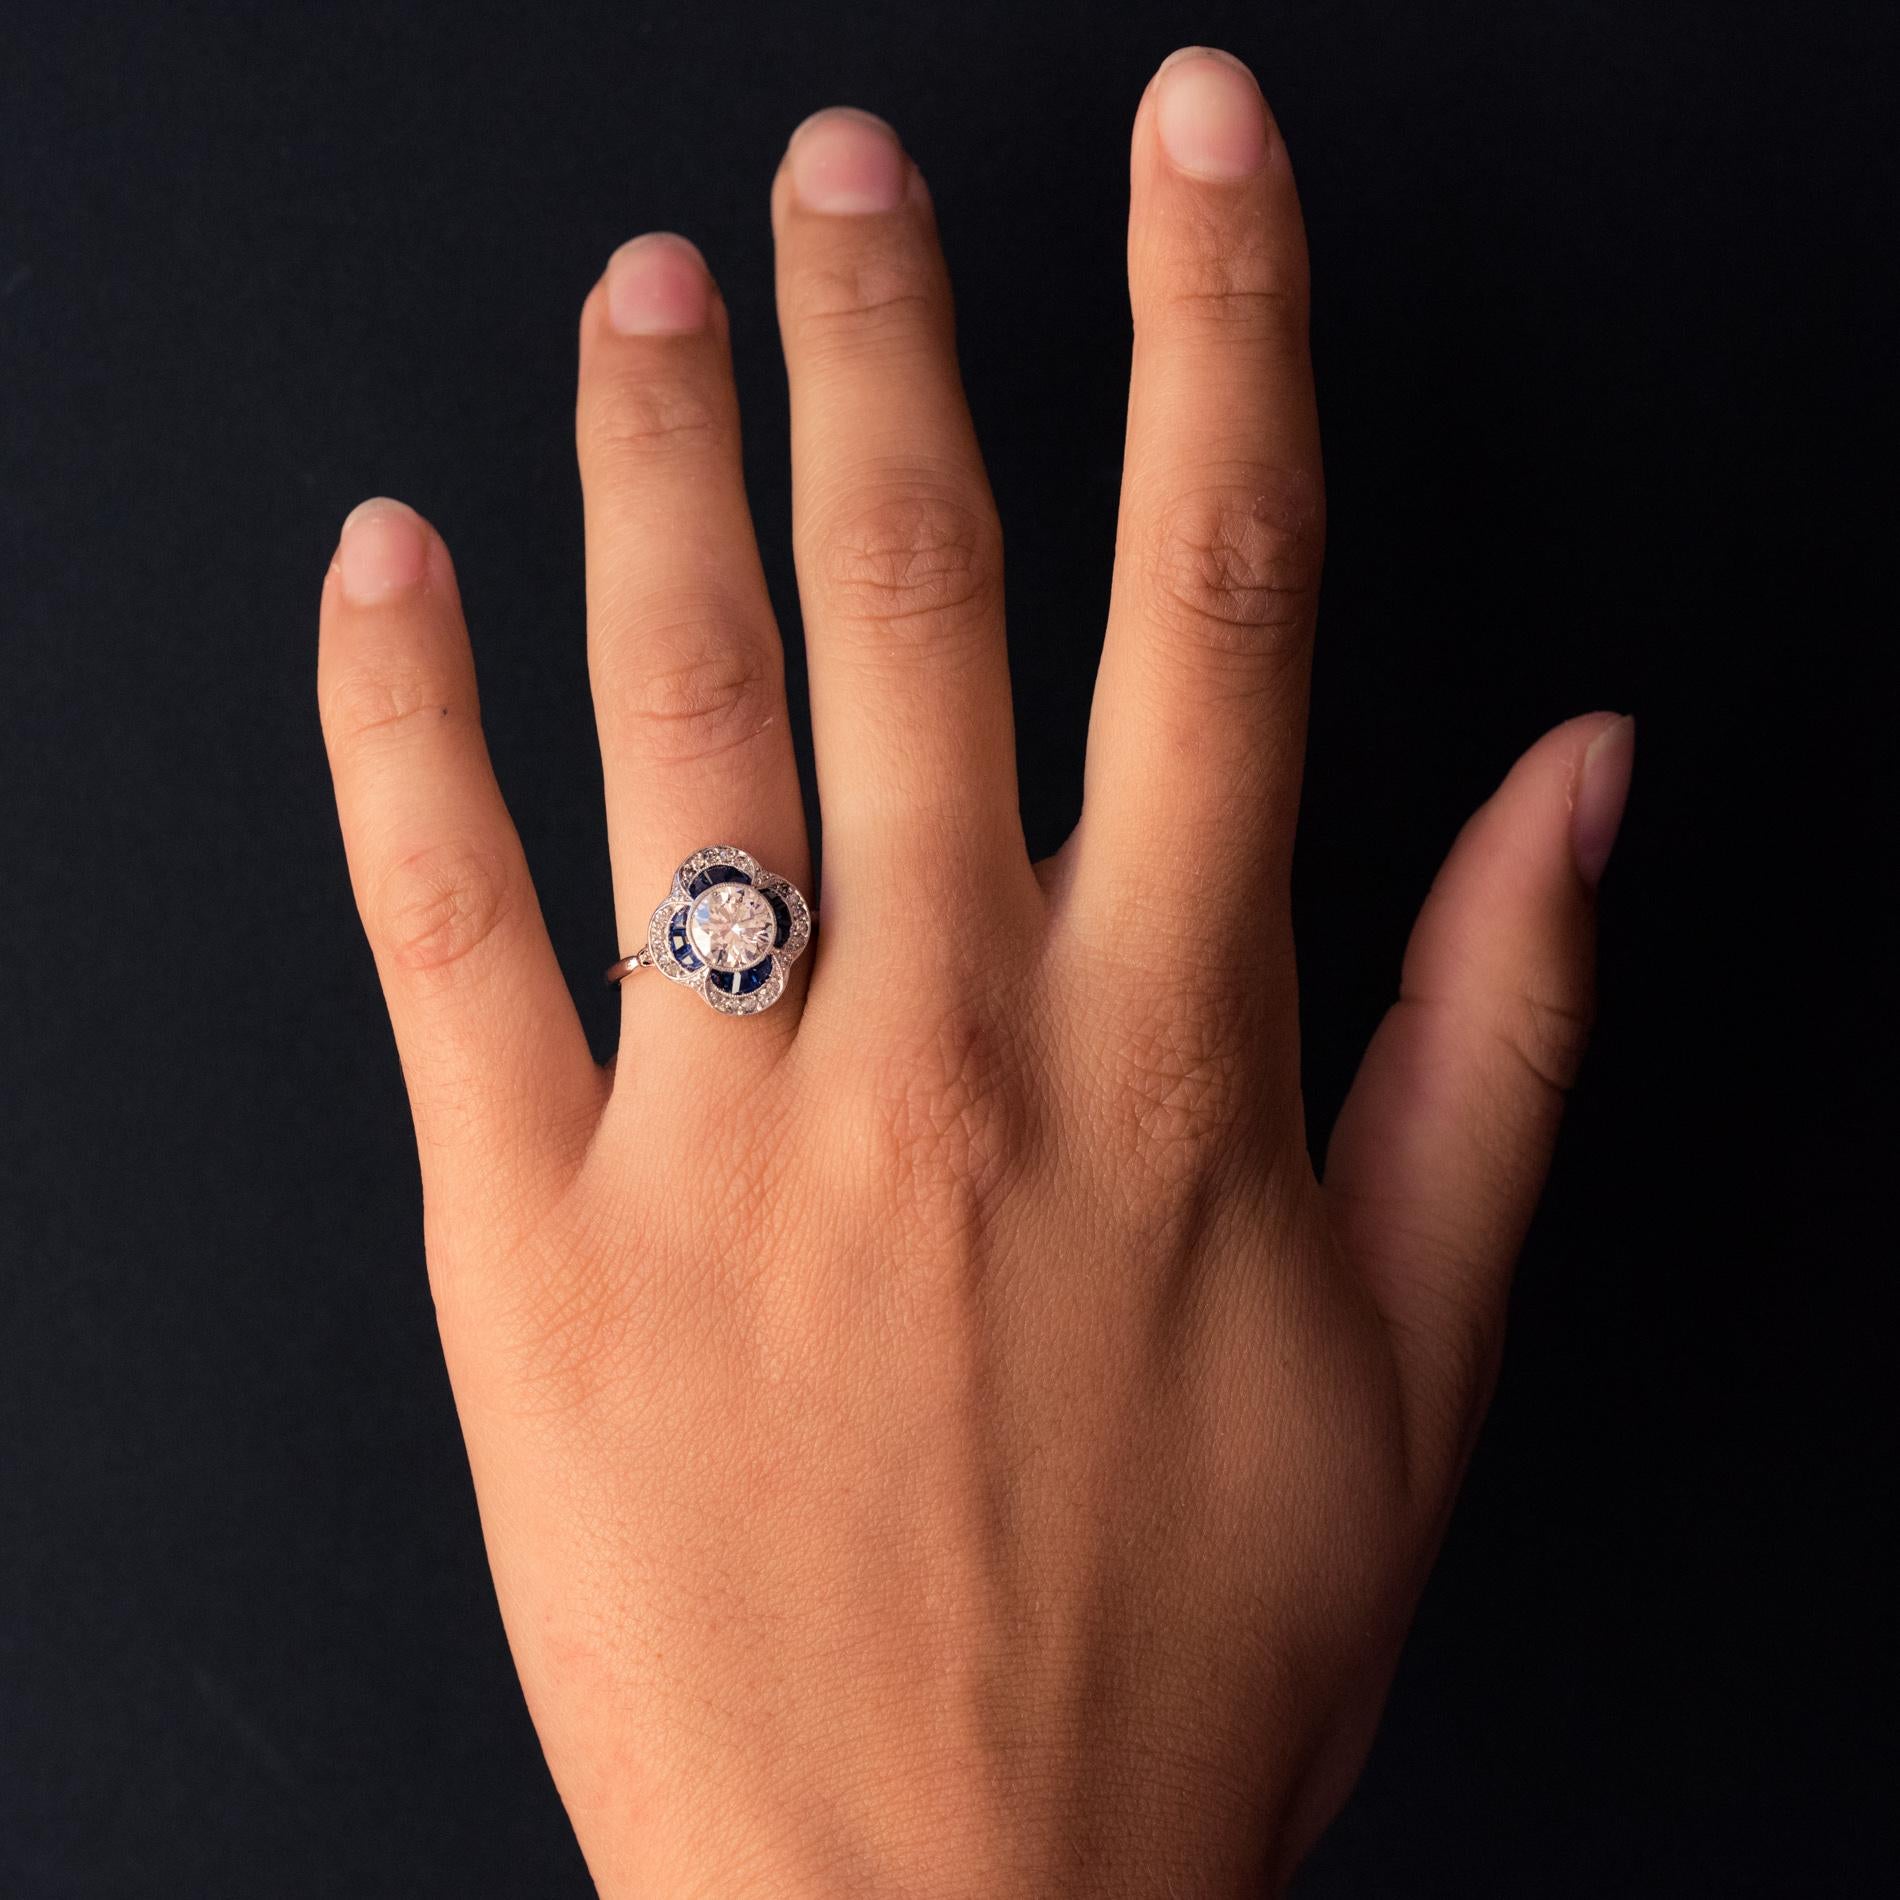 Ring in platinum, dog's head hallmark.
Sublime art deco ring, its clover-shaped setting is set in the center with a modern brilliant-cut diamond in a millegrain bezel setting. Three calibrated sapphires and five 8/8 cut diamonds are set in each